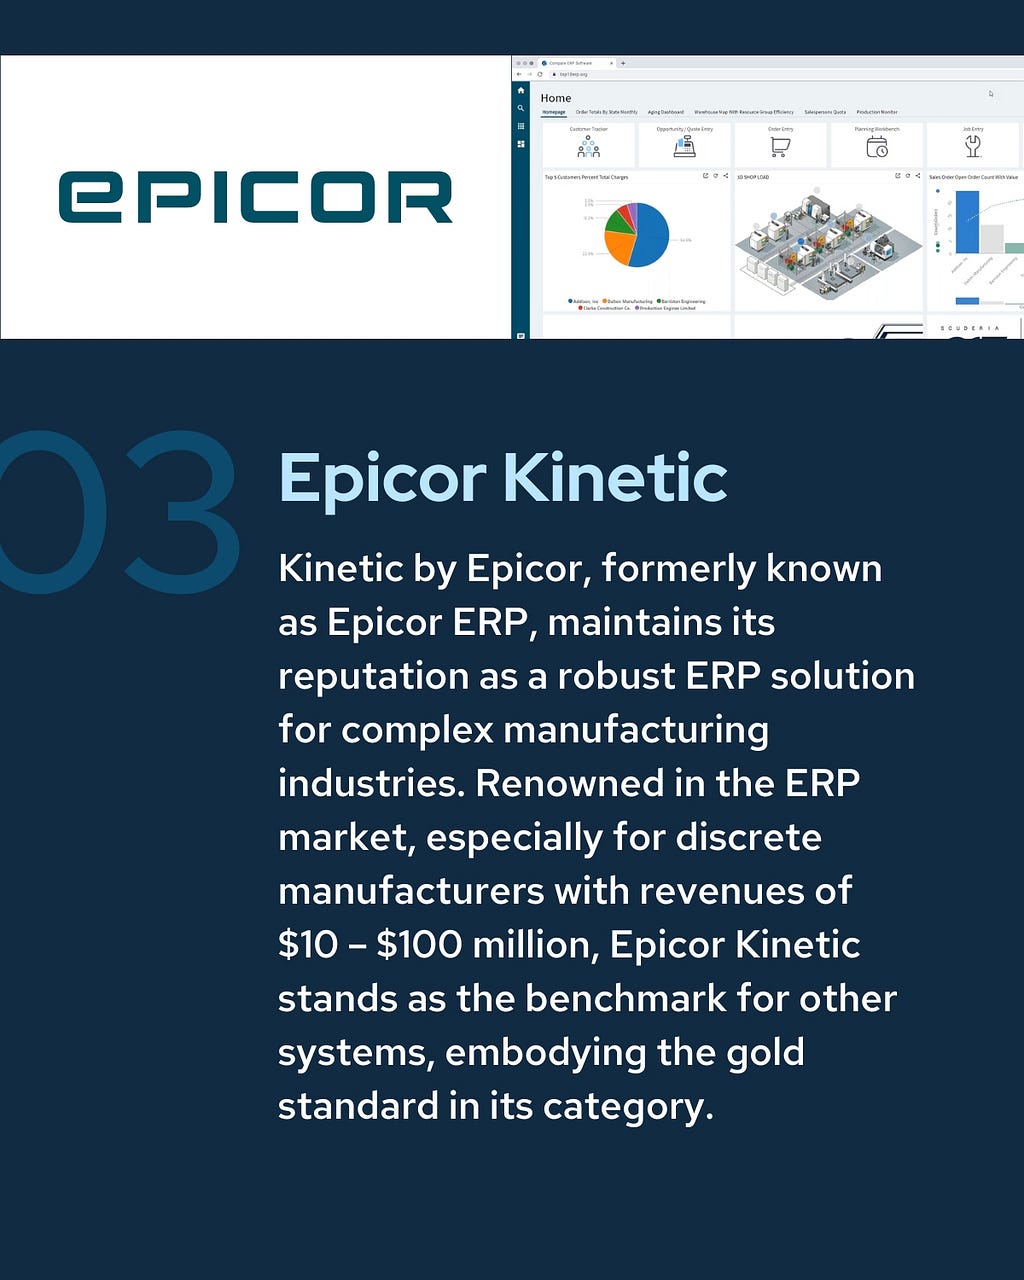 https://www.top10erp.org/products/epicor-kinetic